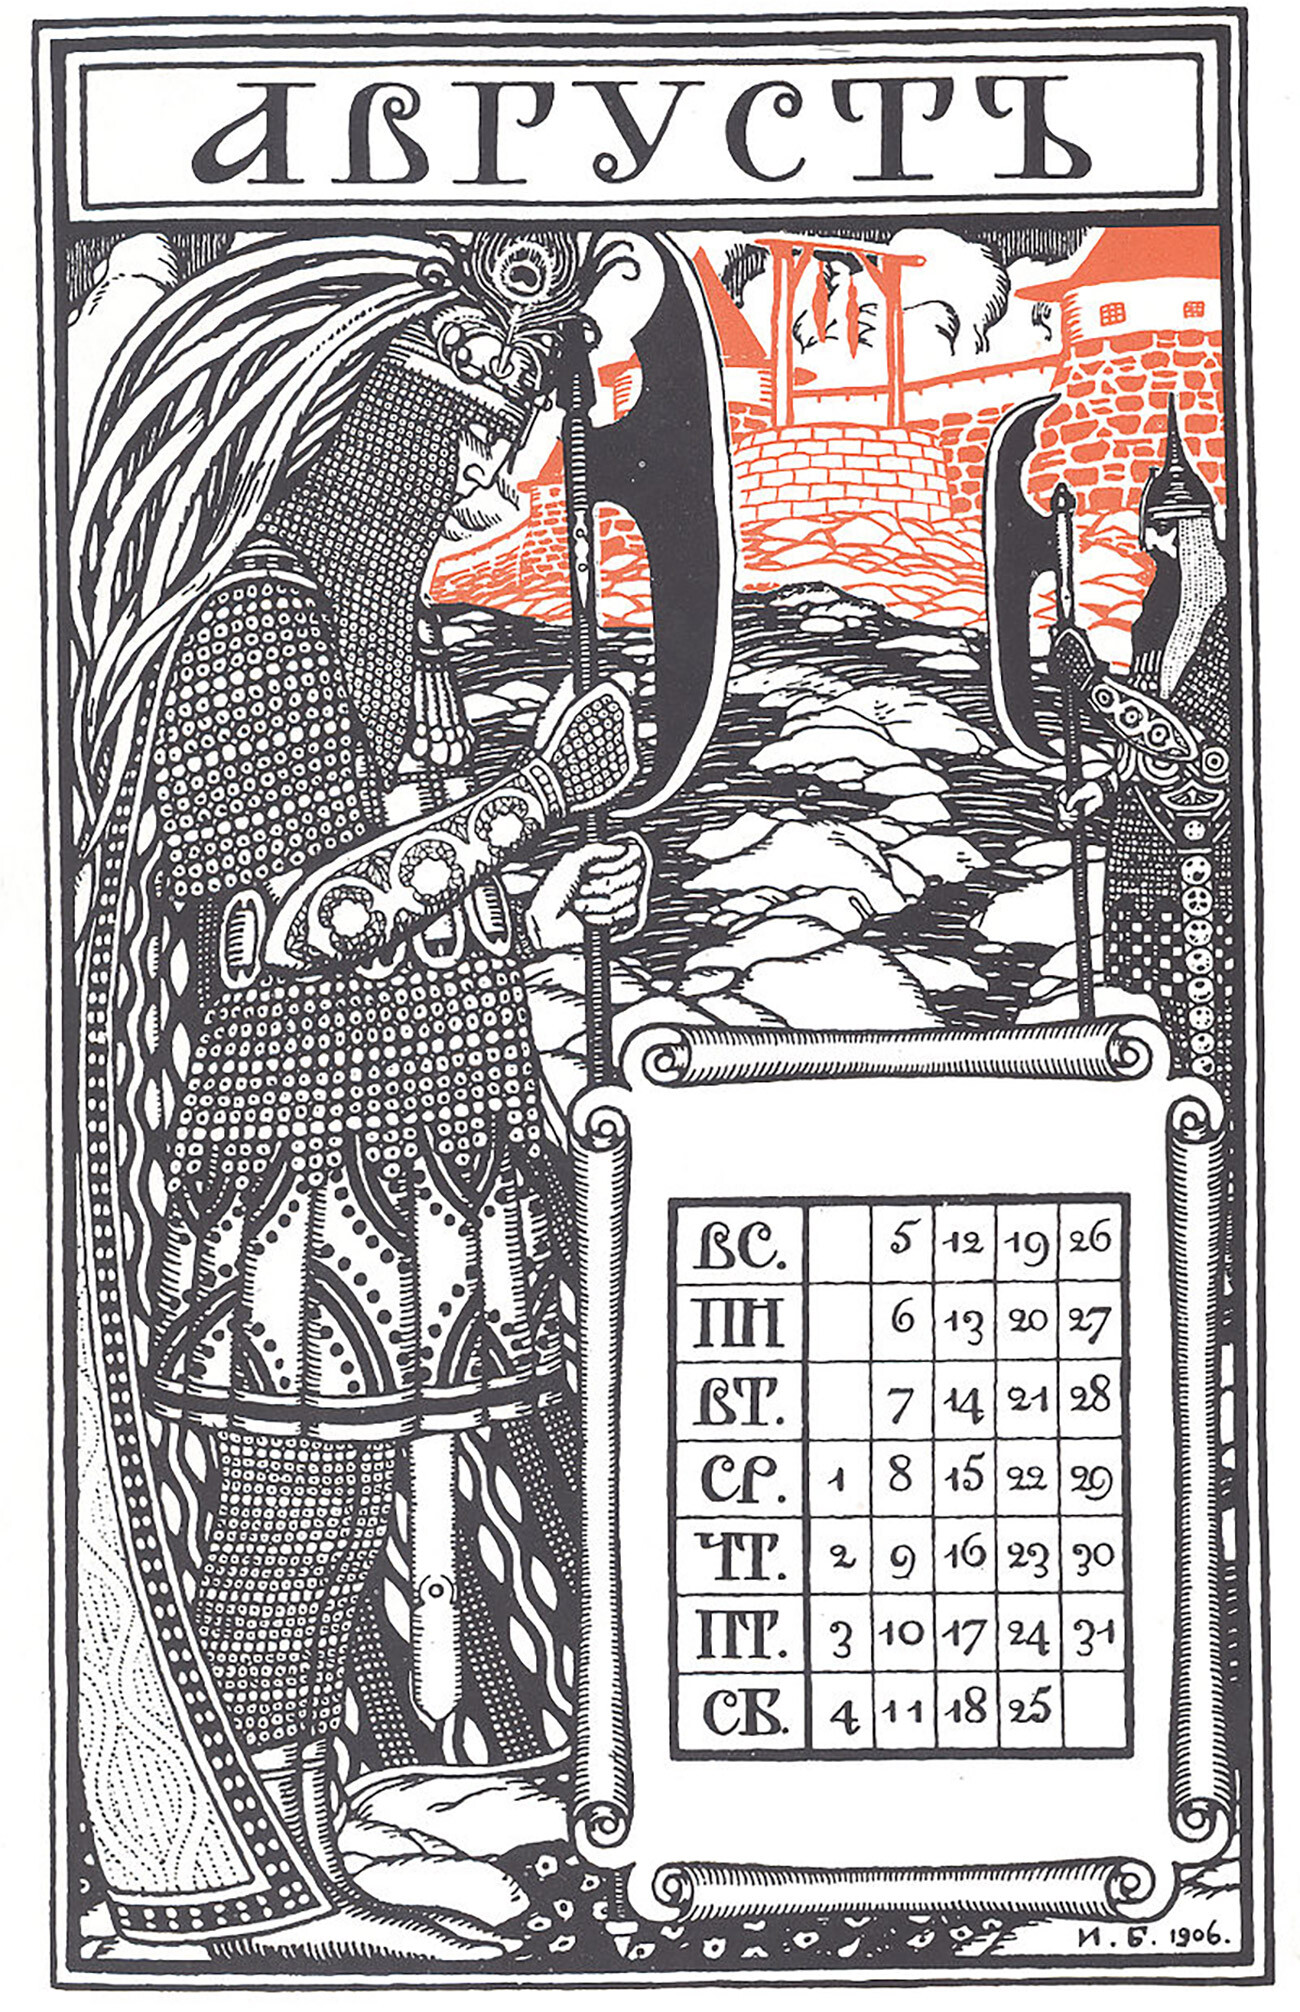 A Russian calendar for August 1906, designed by Ivan Bilibin. Note that all weeks start on 